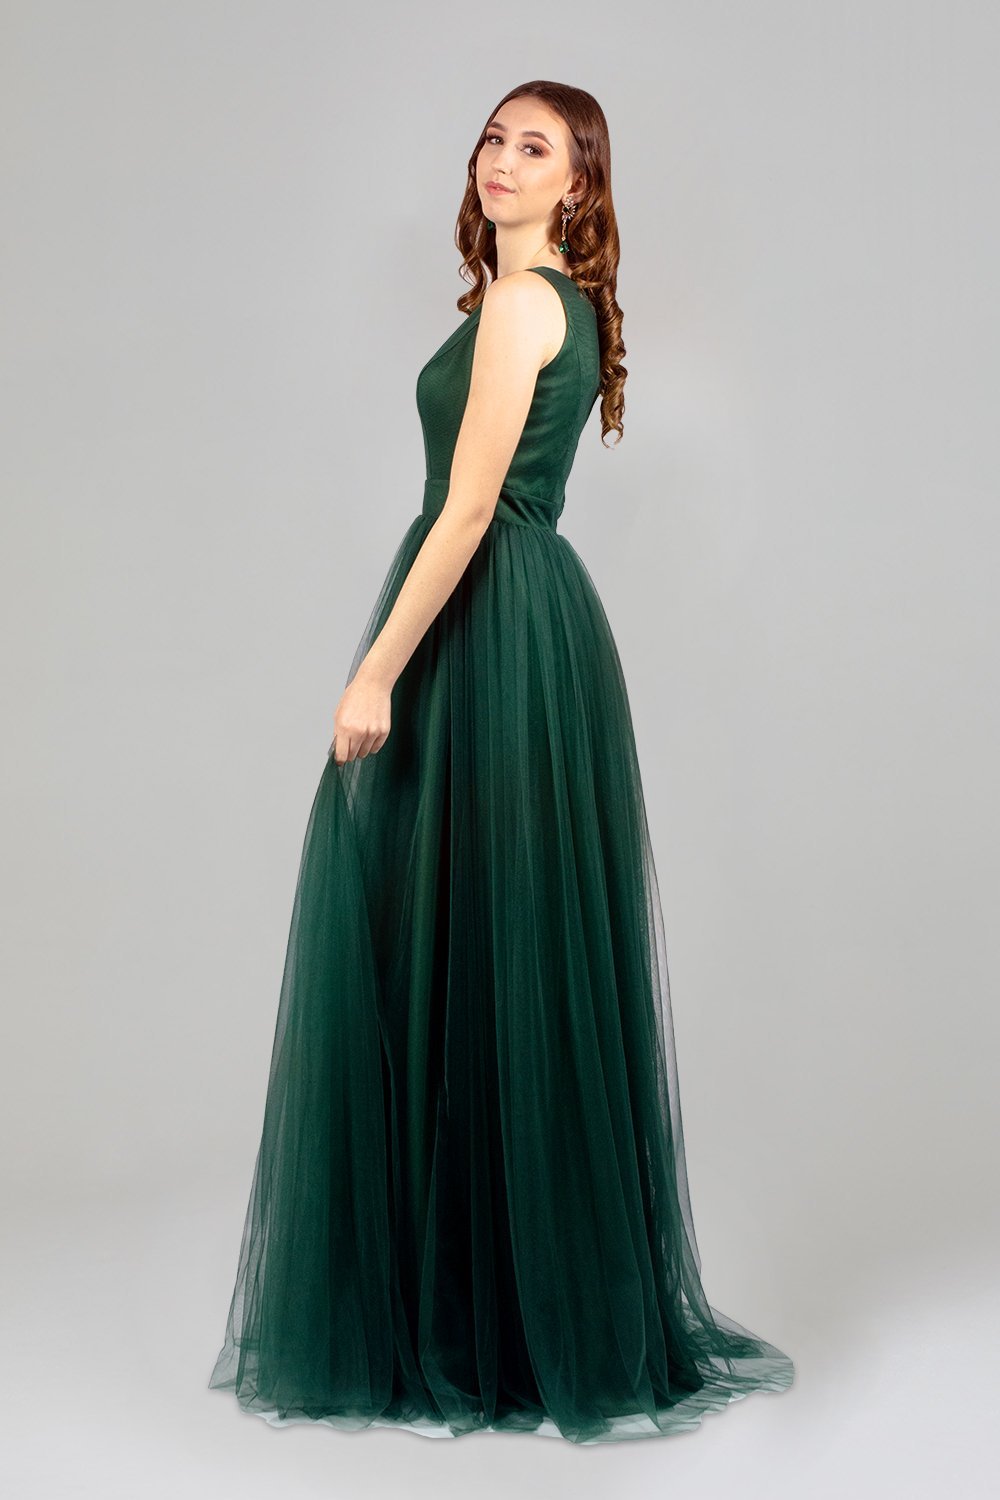 Forest green ruffle gown | Ruffle gown, Stunning gowns, Gowns